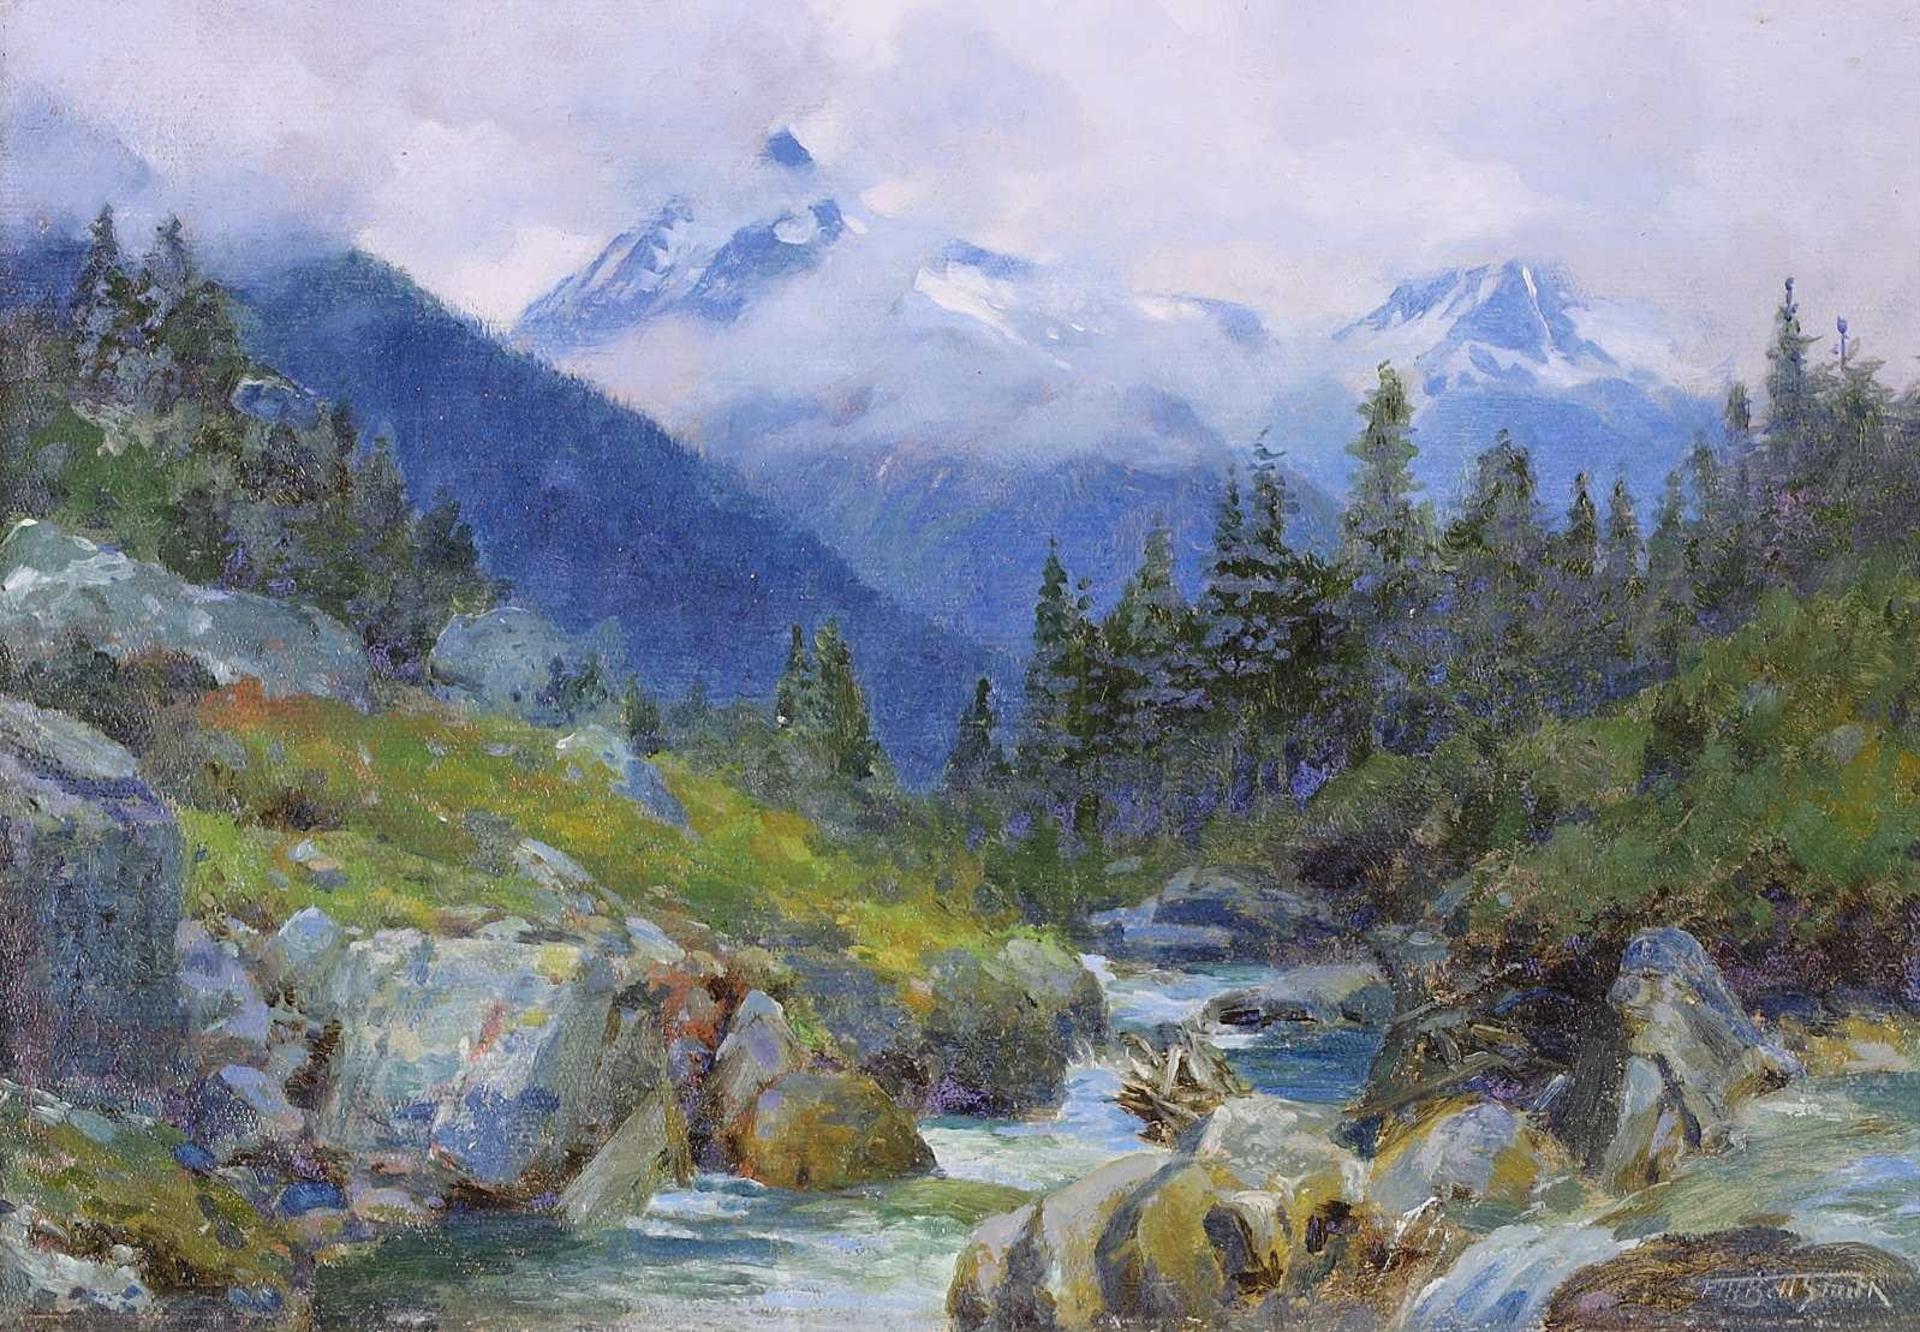 Frederic Martlett Bell-Smith (1846-1923) - Mountain Landscape With Misty Peaks And Rocky Creek